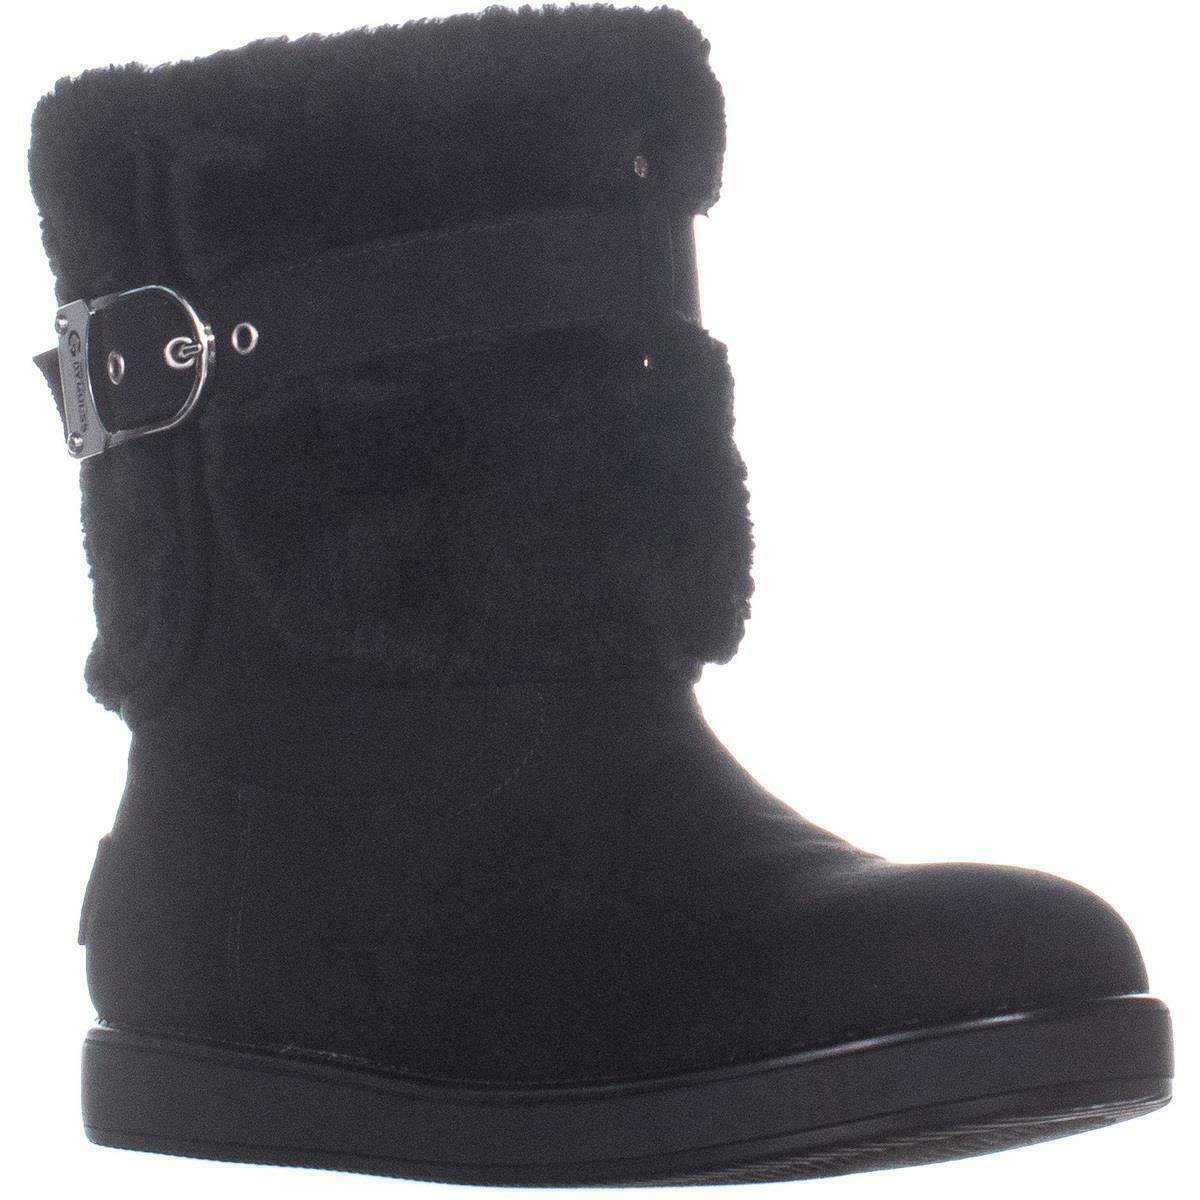 G By Guess Aussie Winter Boots, Black Fabric, 6 US - Boots